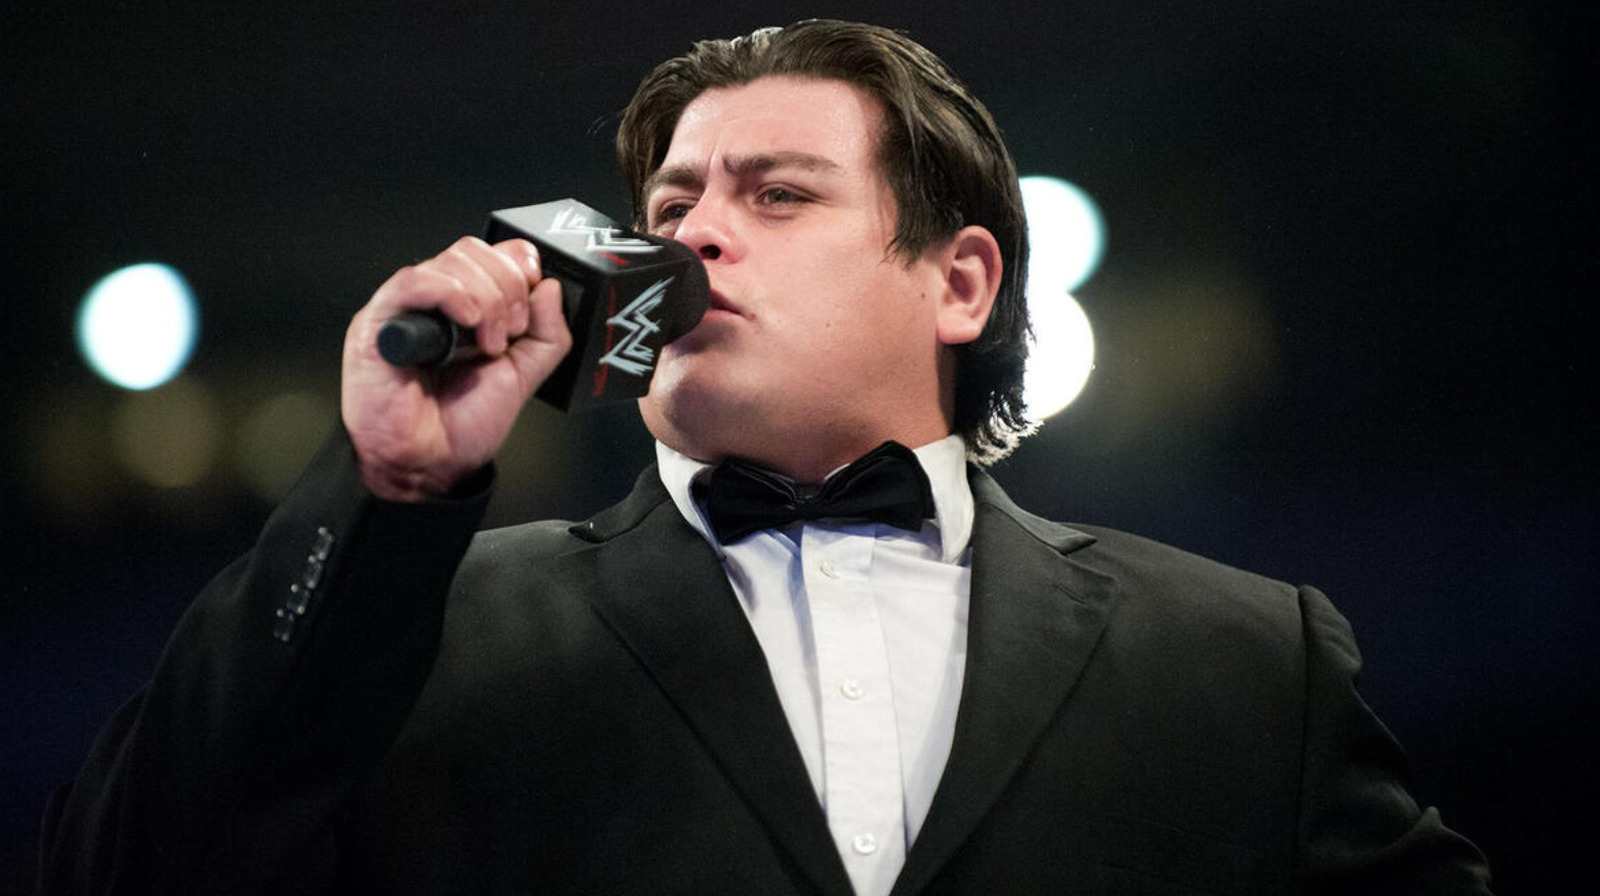 Ricardo Rodriguez Opens Up About Issues With Having Non-Wrestling Role In WWE